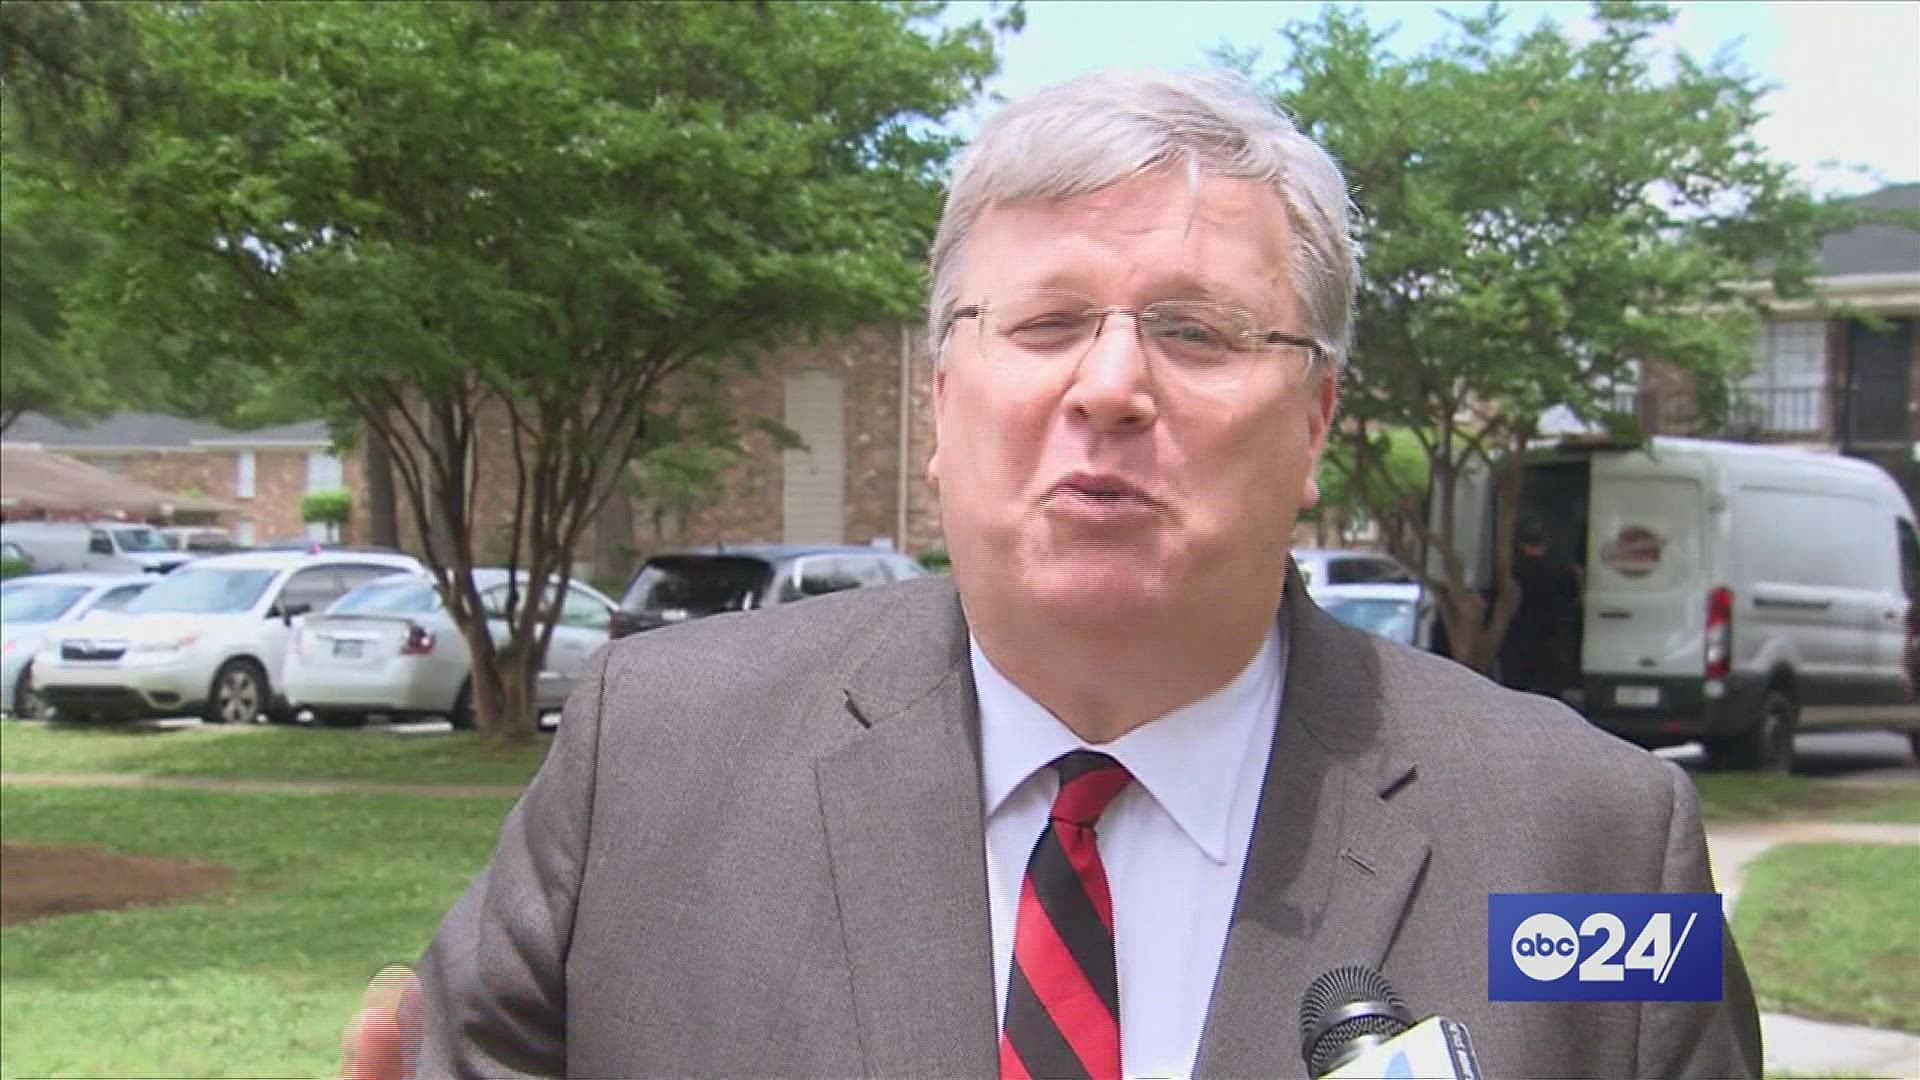 In August the public will have a chance to vote on whether or not the Memphis City Council extends term limits. Mayor Jim Strickland has not expressed favor yet.